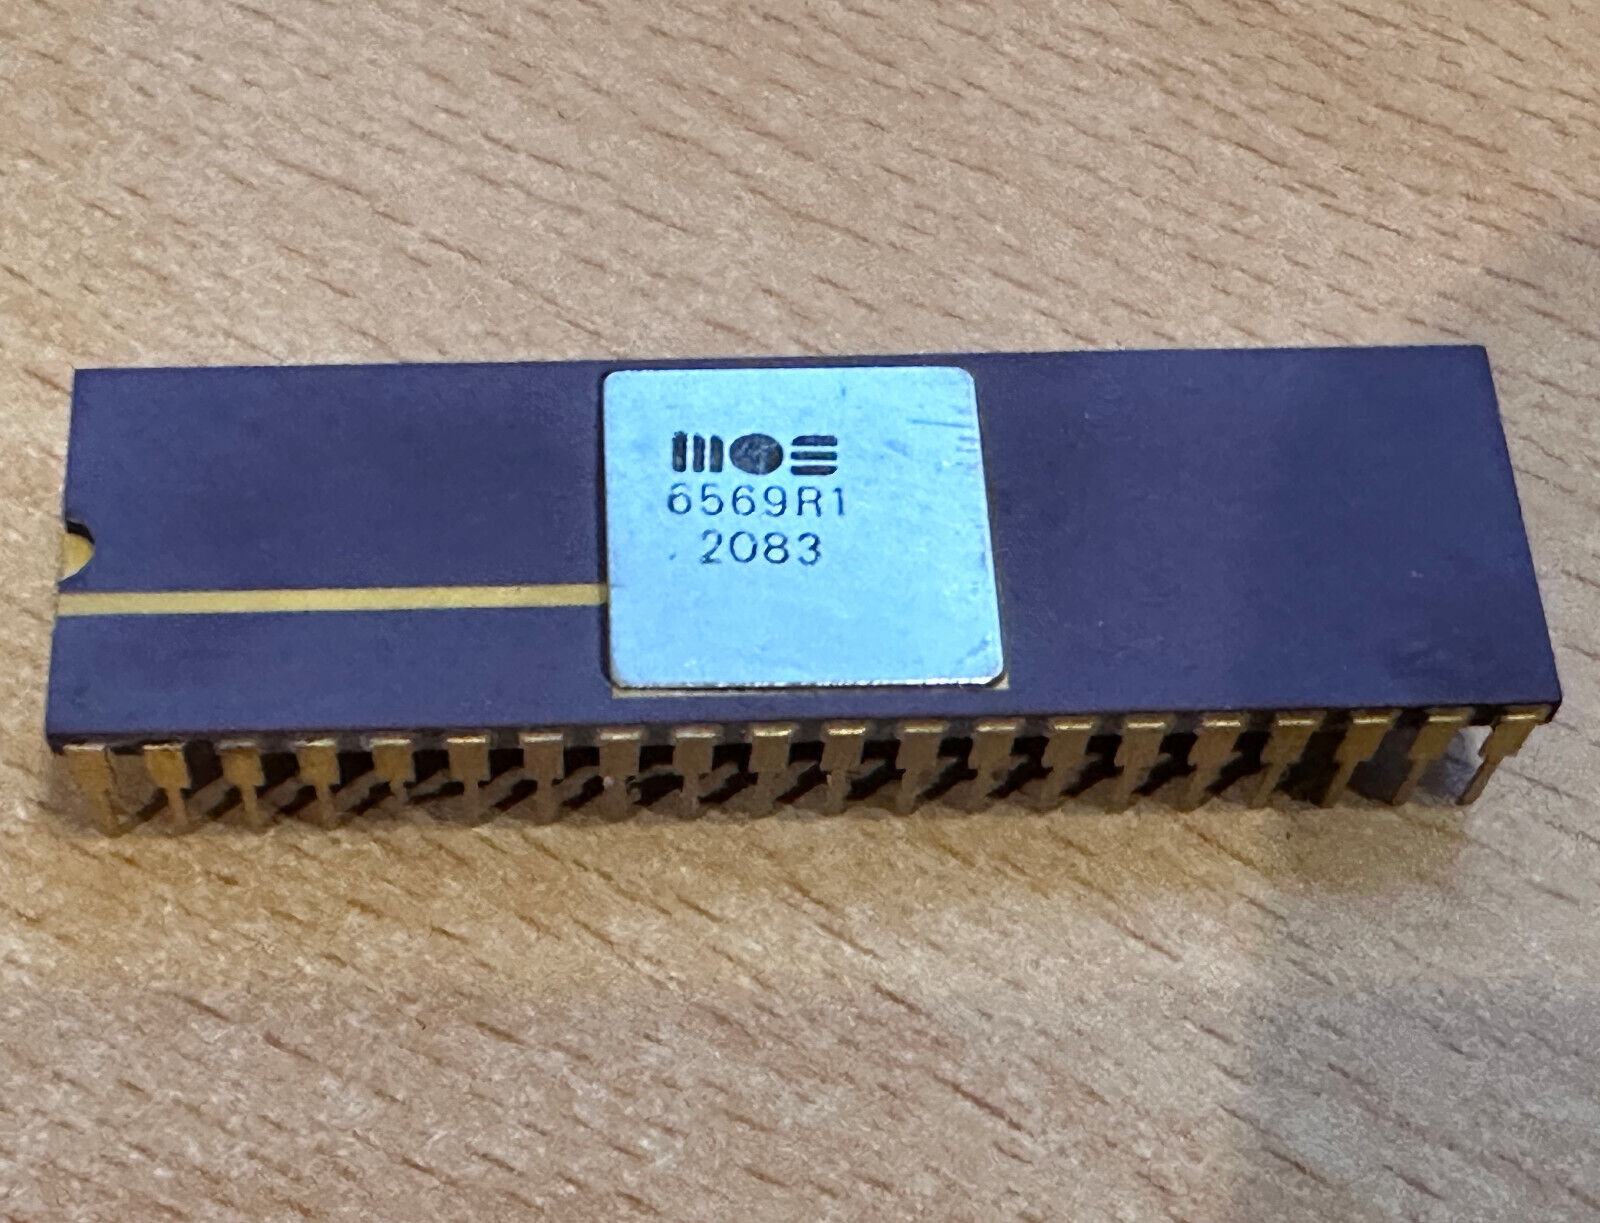 6569R1 MOS Vic Video Chip Ic for Commodore C64, SX64 Ceramic Gold P.W : 20 83,